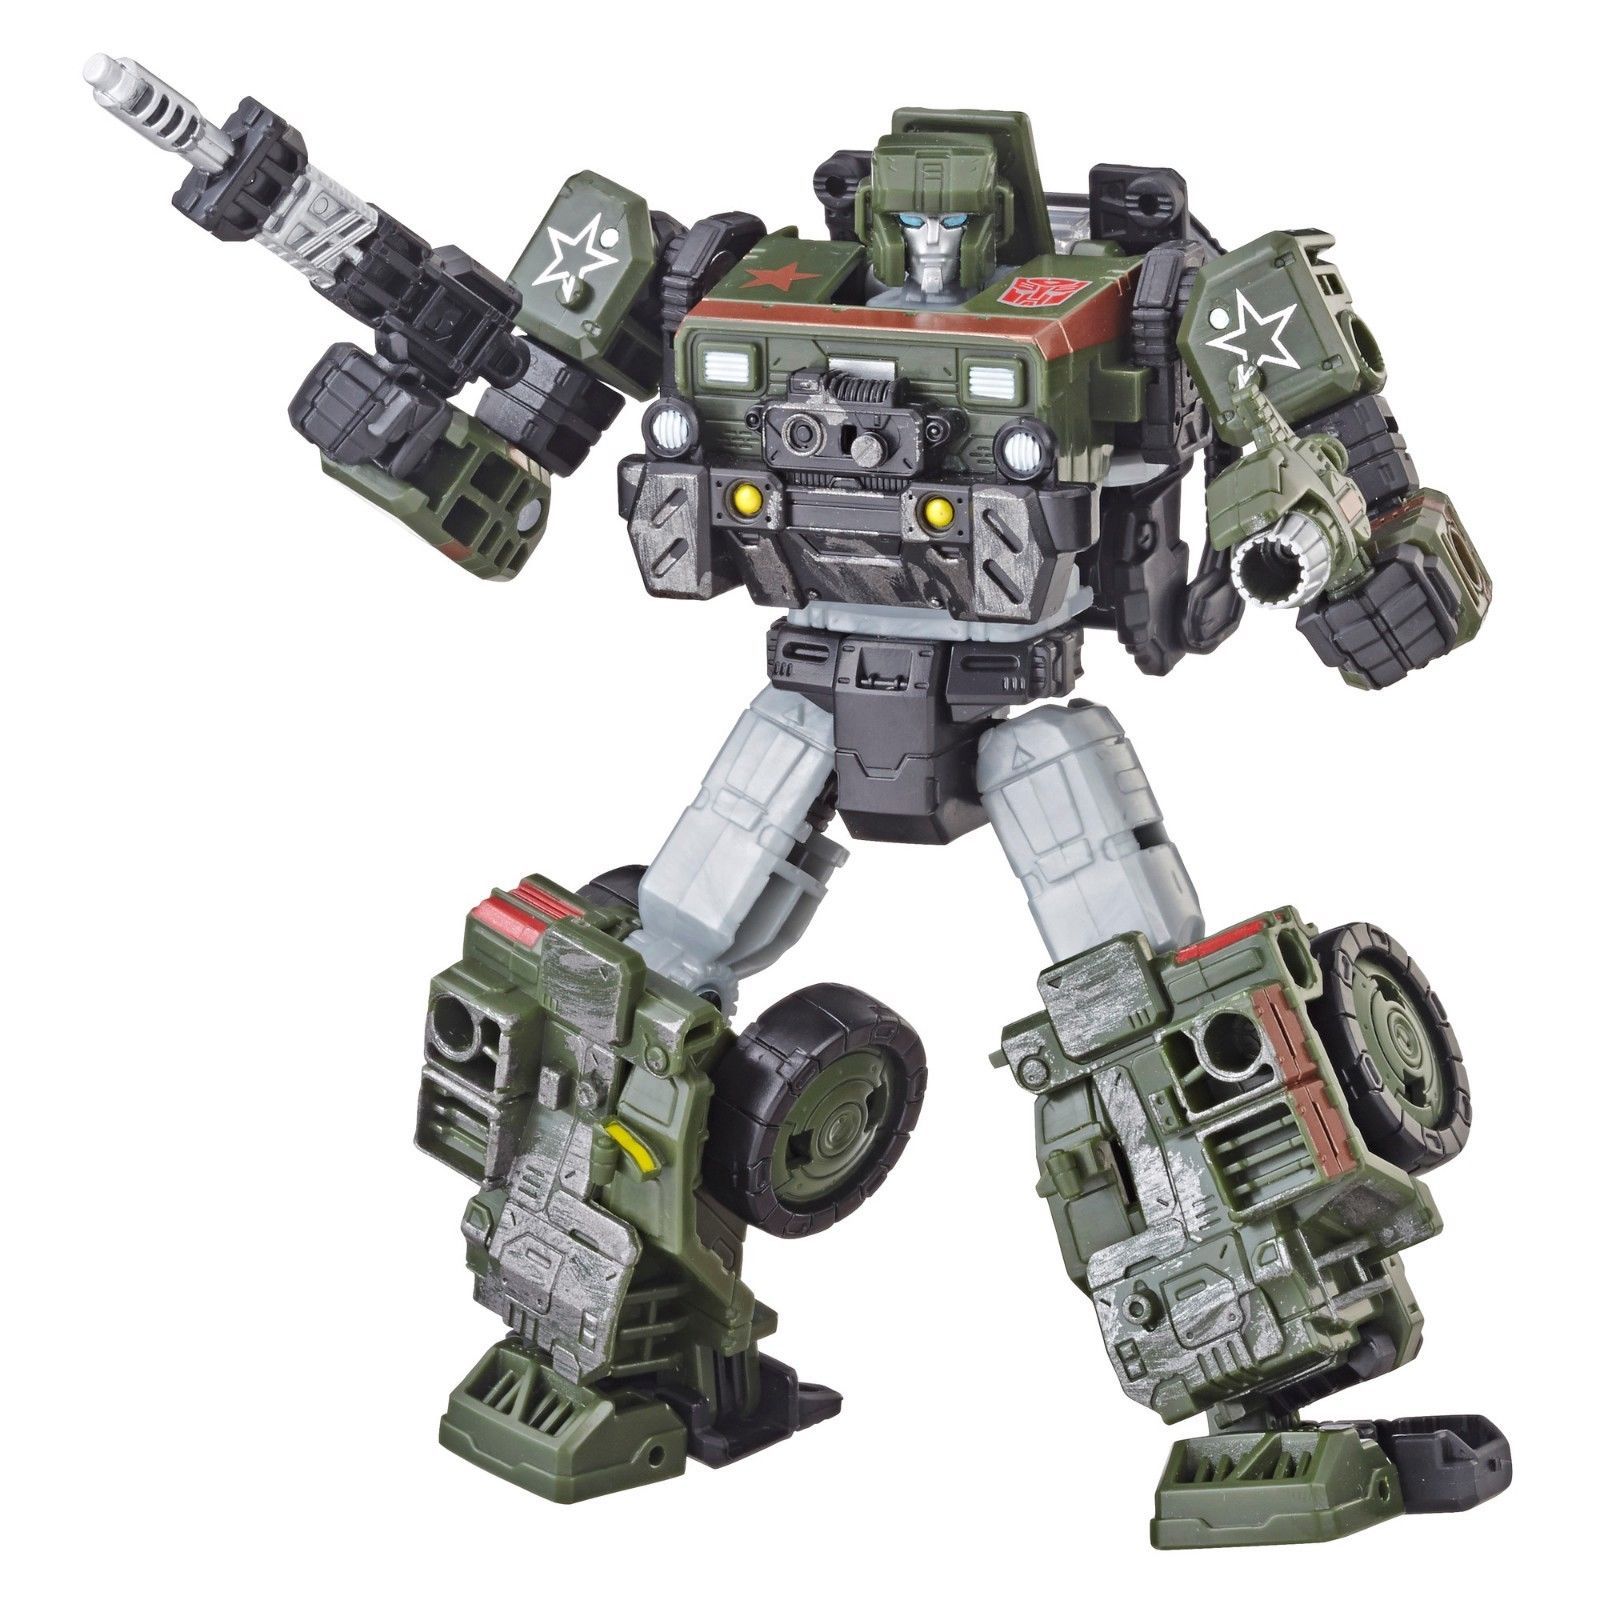 Transformers Generations War For Cybertron: Siege Deluxe Autobot Hound Action Figure WFC-S9